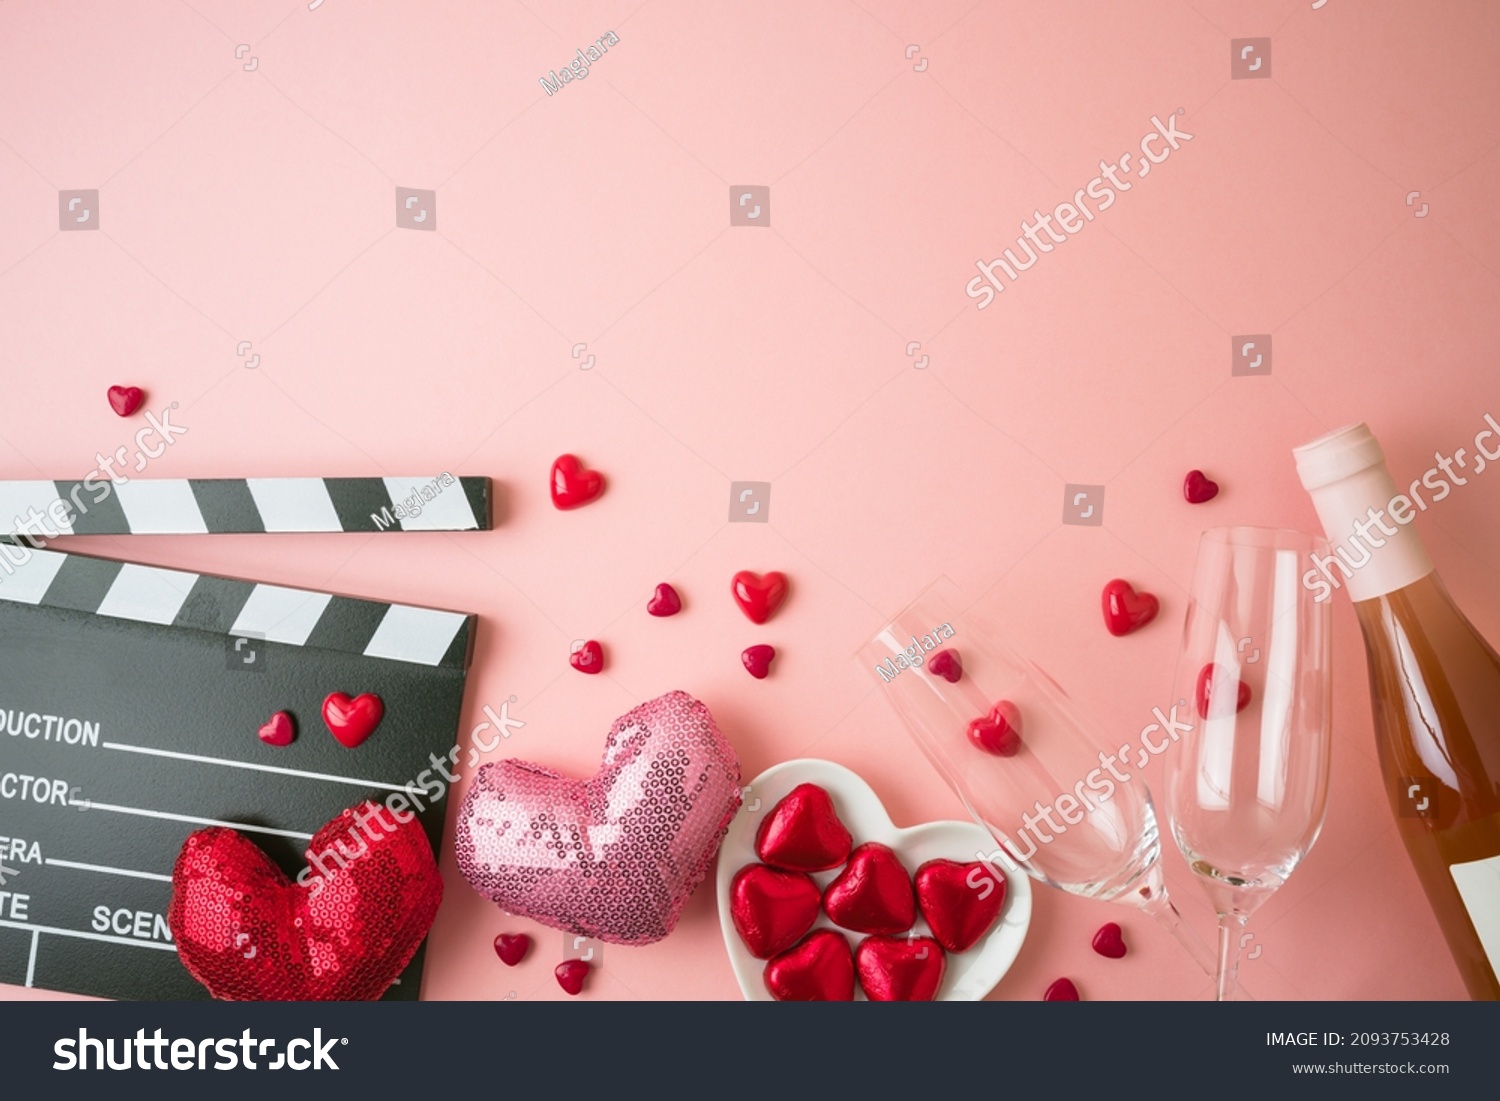 Romantic movie border frame with movie clapper board, heart shapes and wine bottle on pink background. Valentines day concept. Flat lay, top view #2093753428